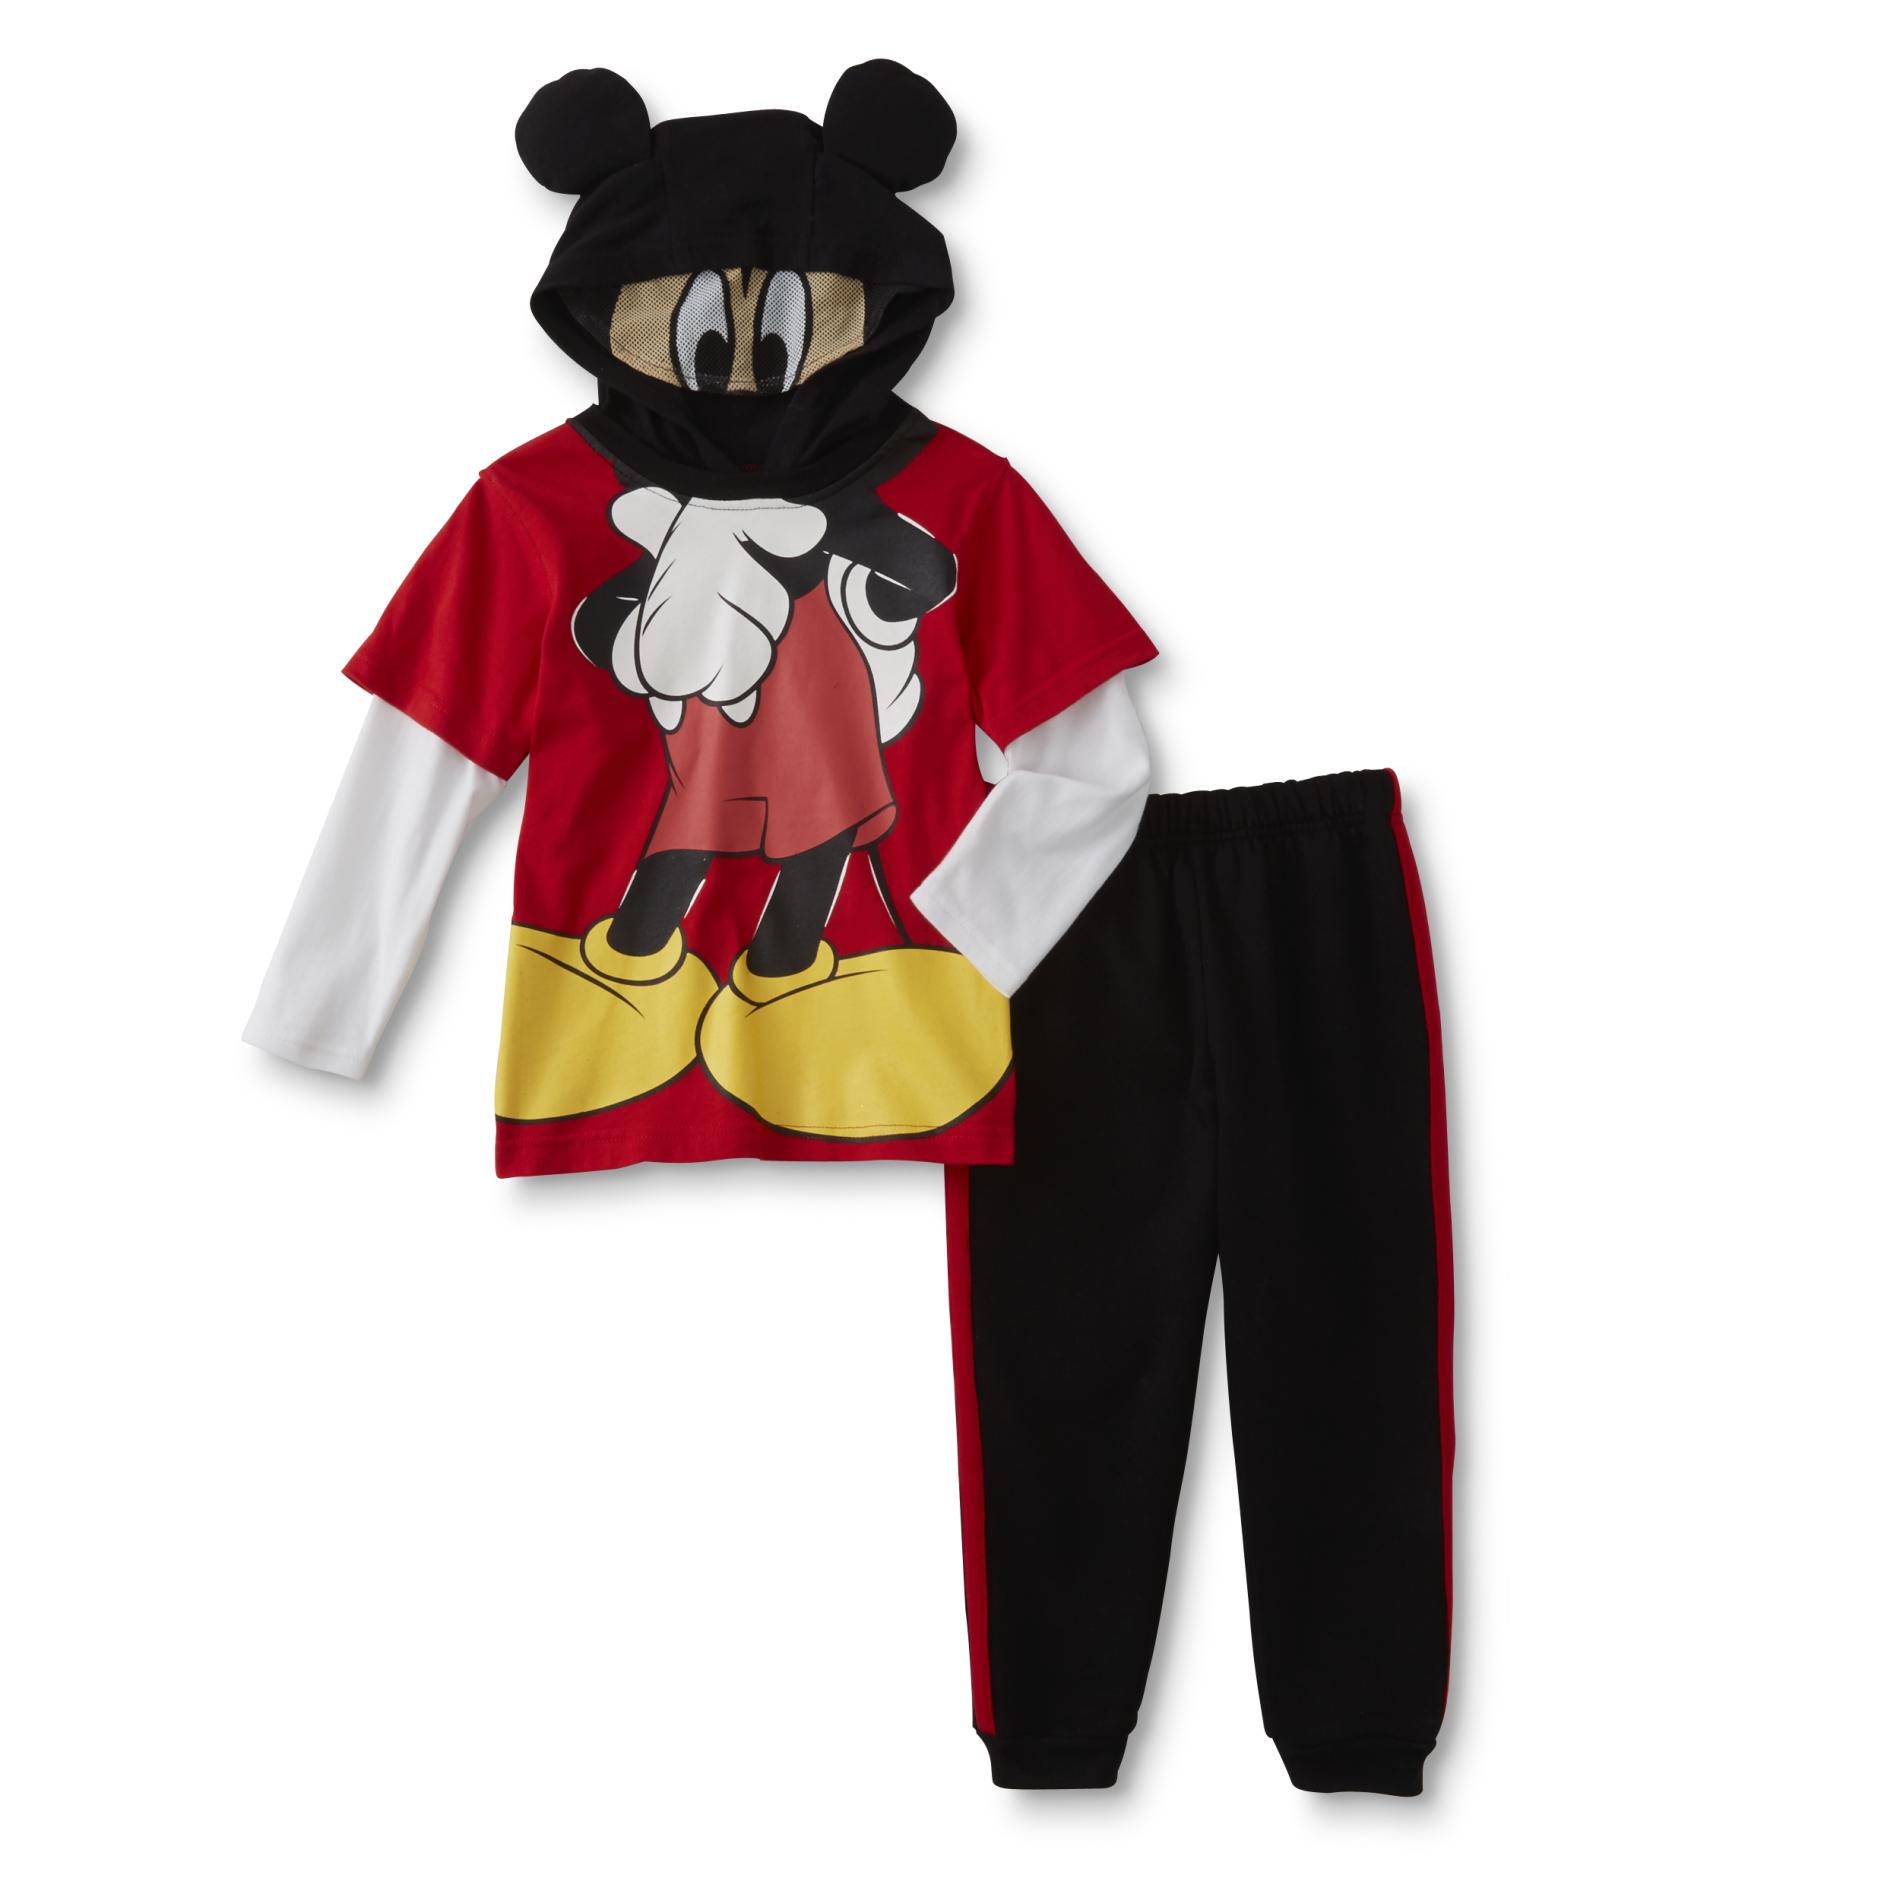 Disney Mickey Mouse Infant & Toddler Boy's Hooded Costume Shirt & Pants - Red